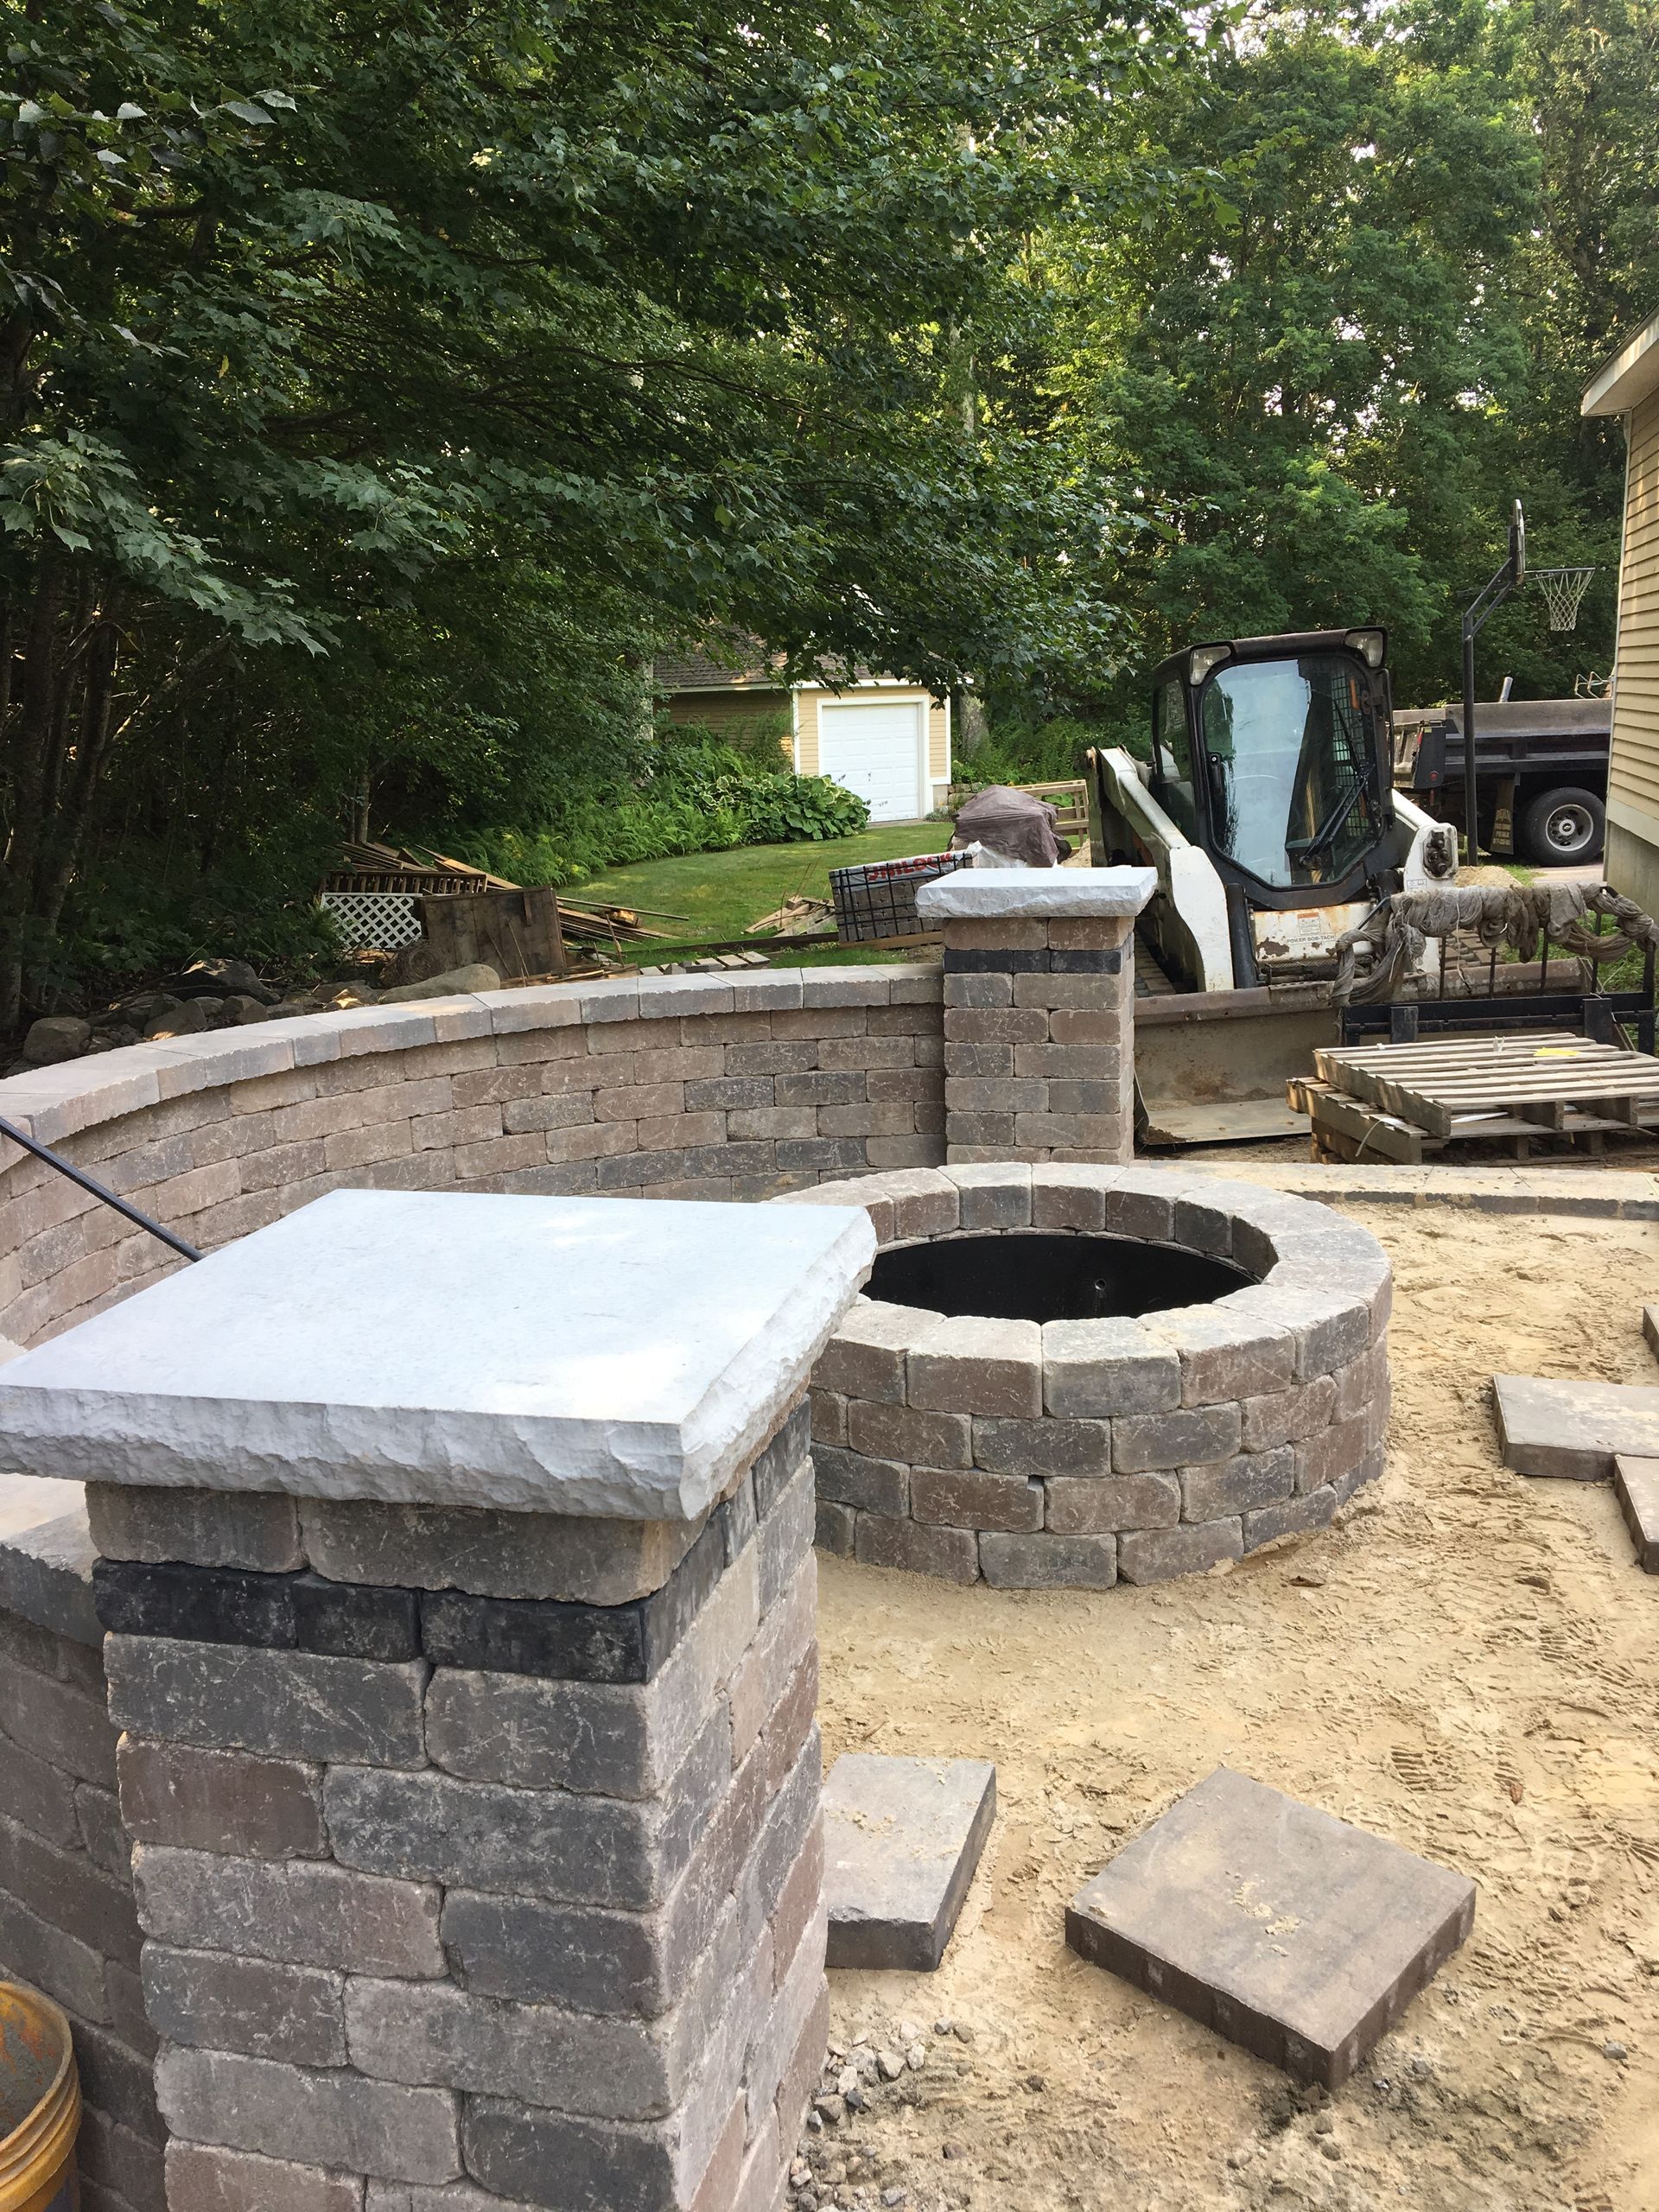 A fire pit is being built in a backyard